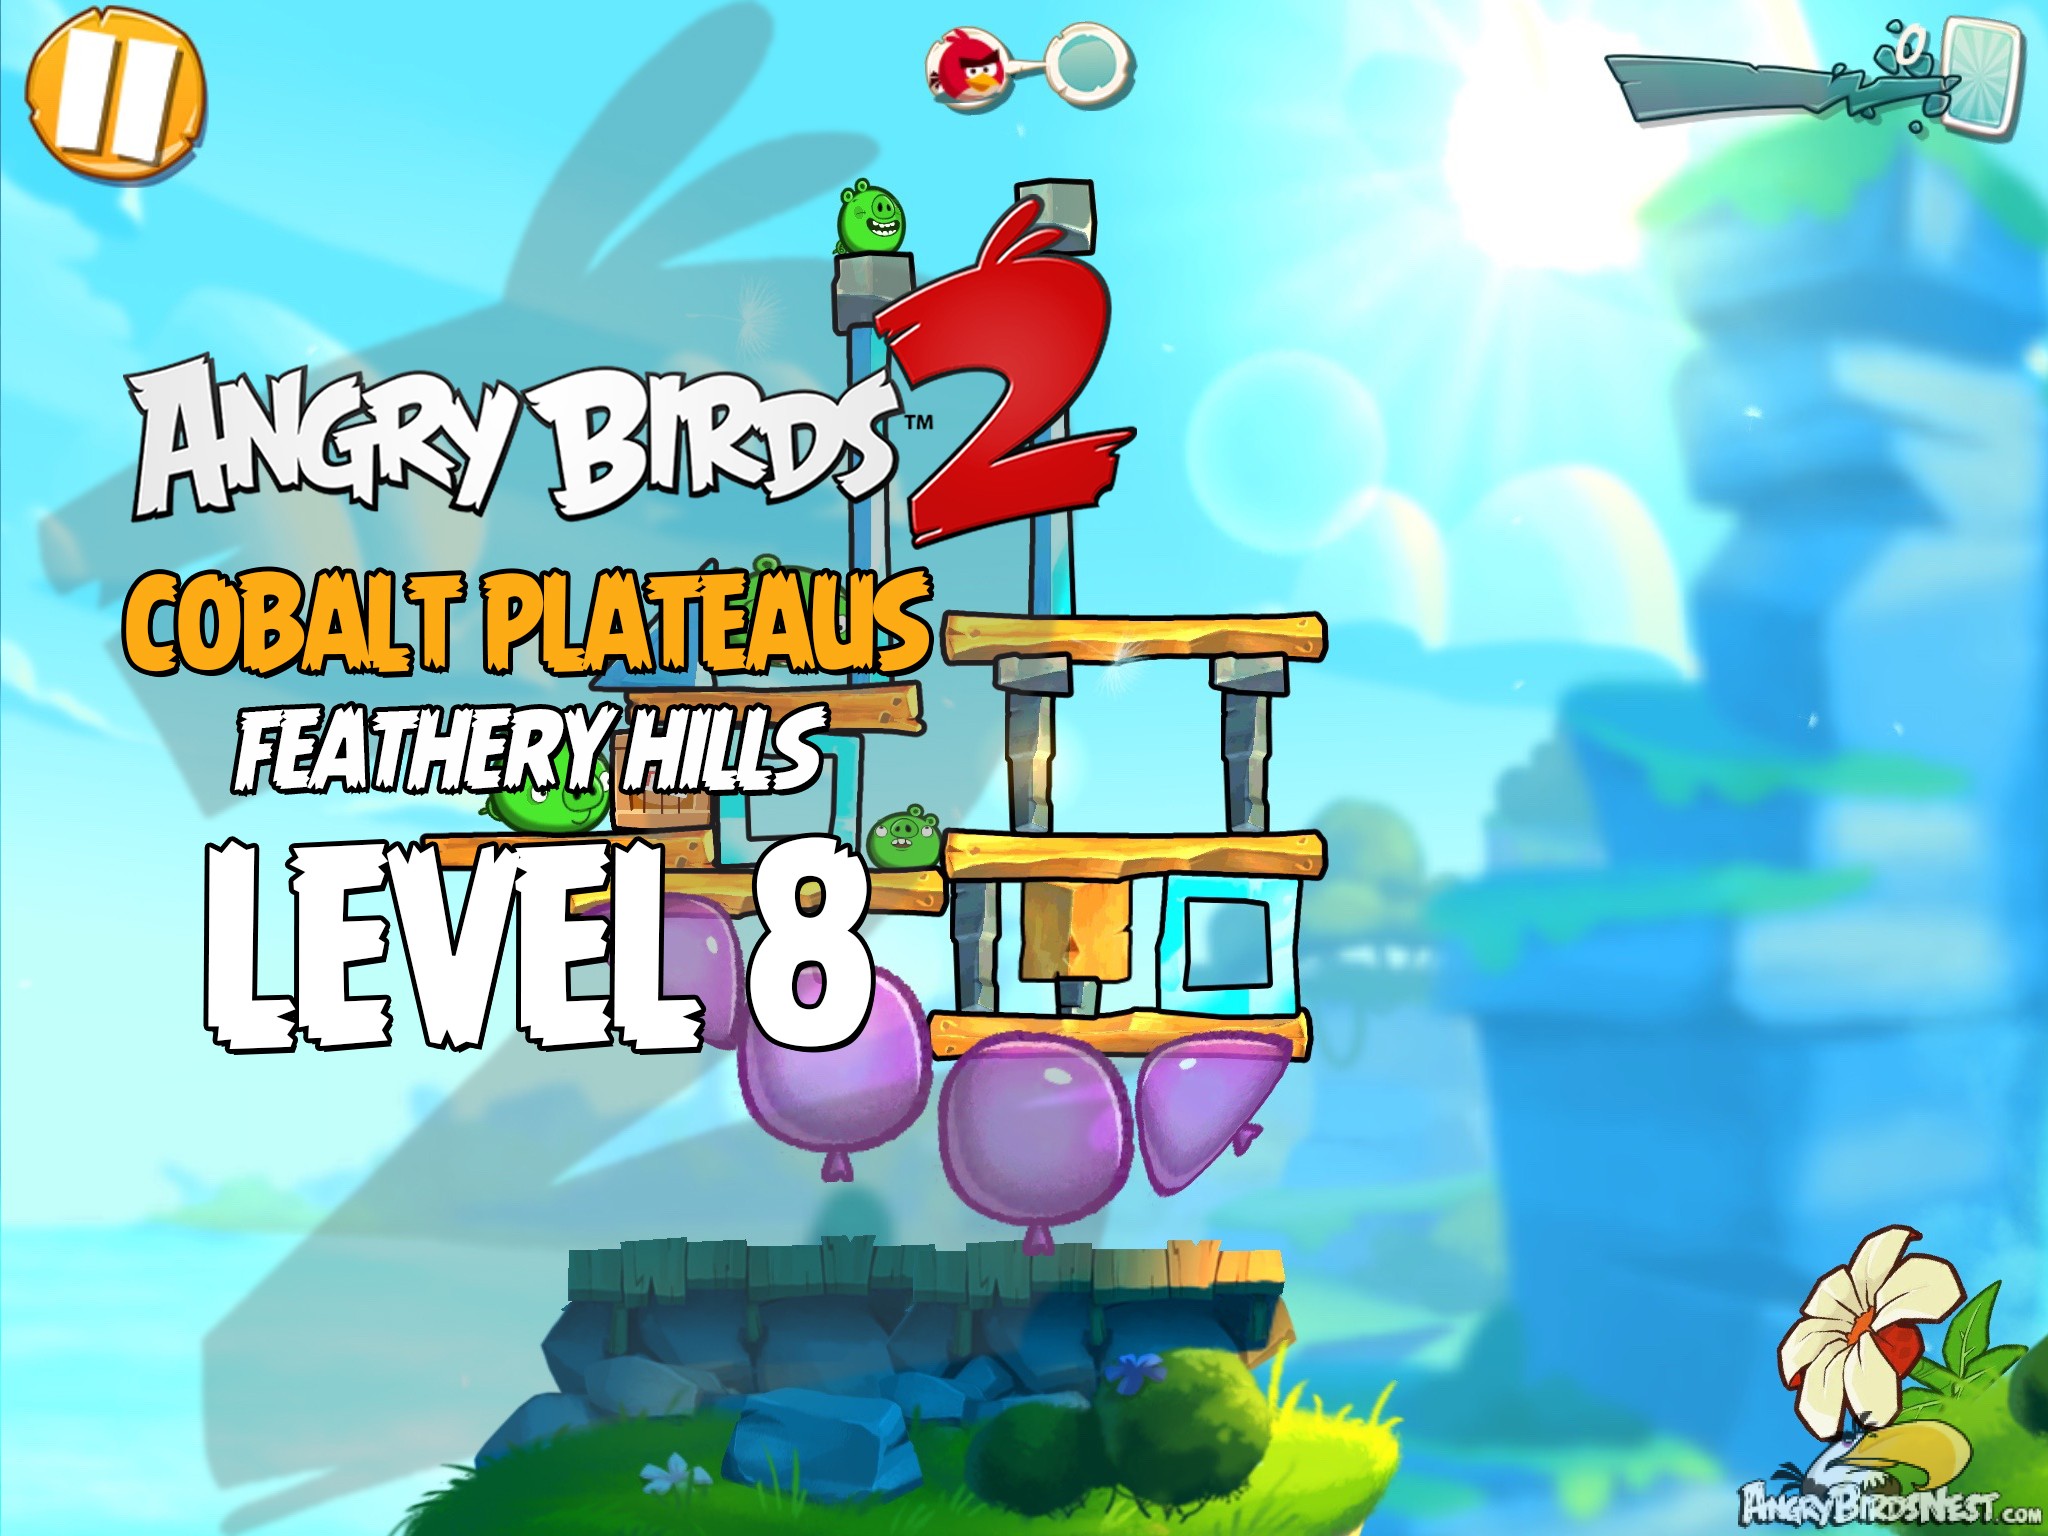 Angry Birds 2 Cobalt Plateaus Feathery Hills Level 8